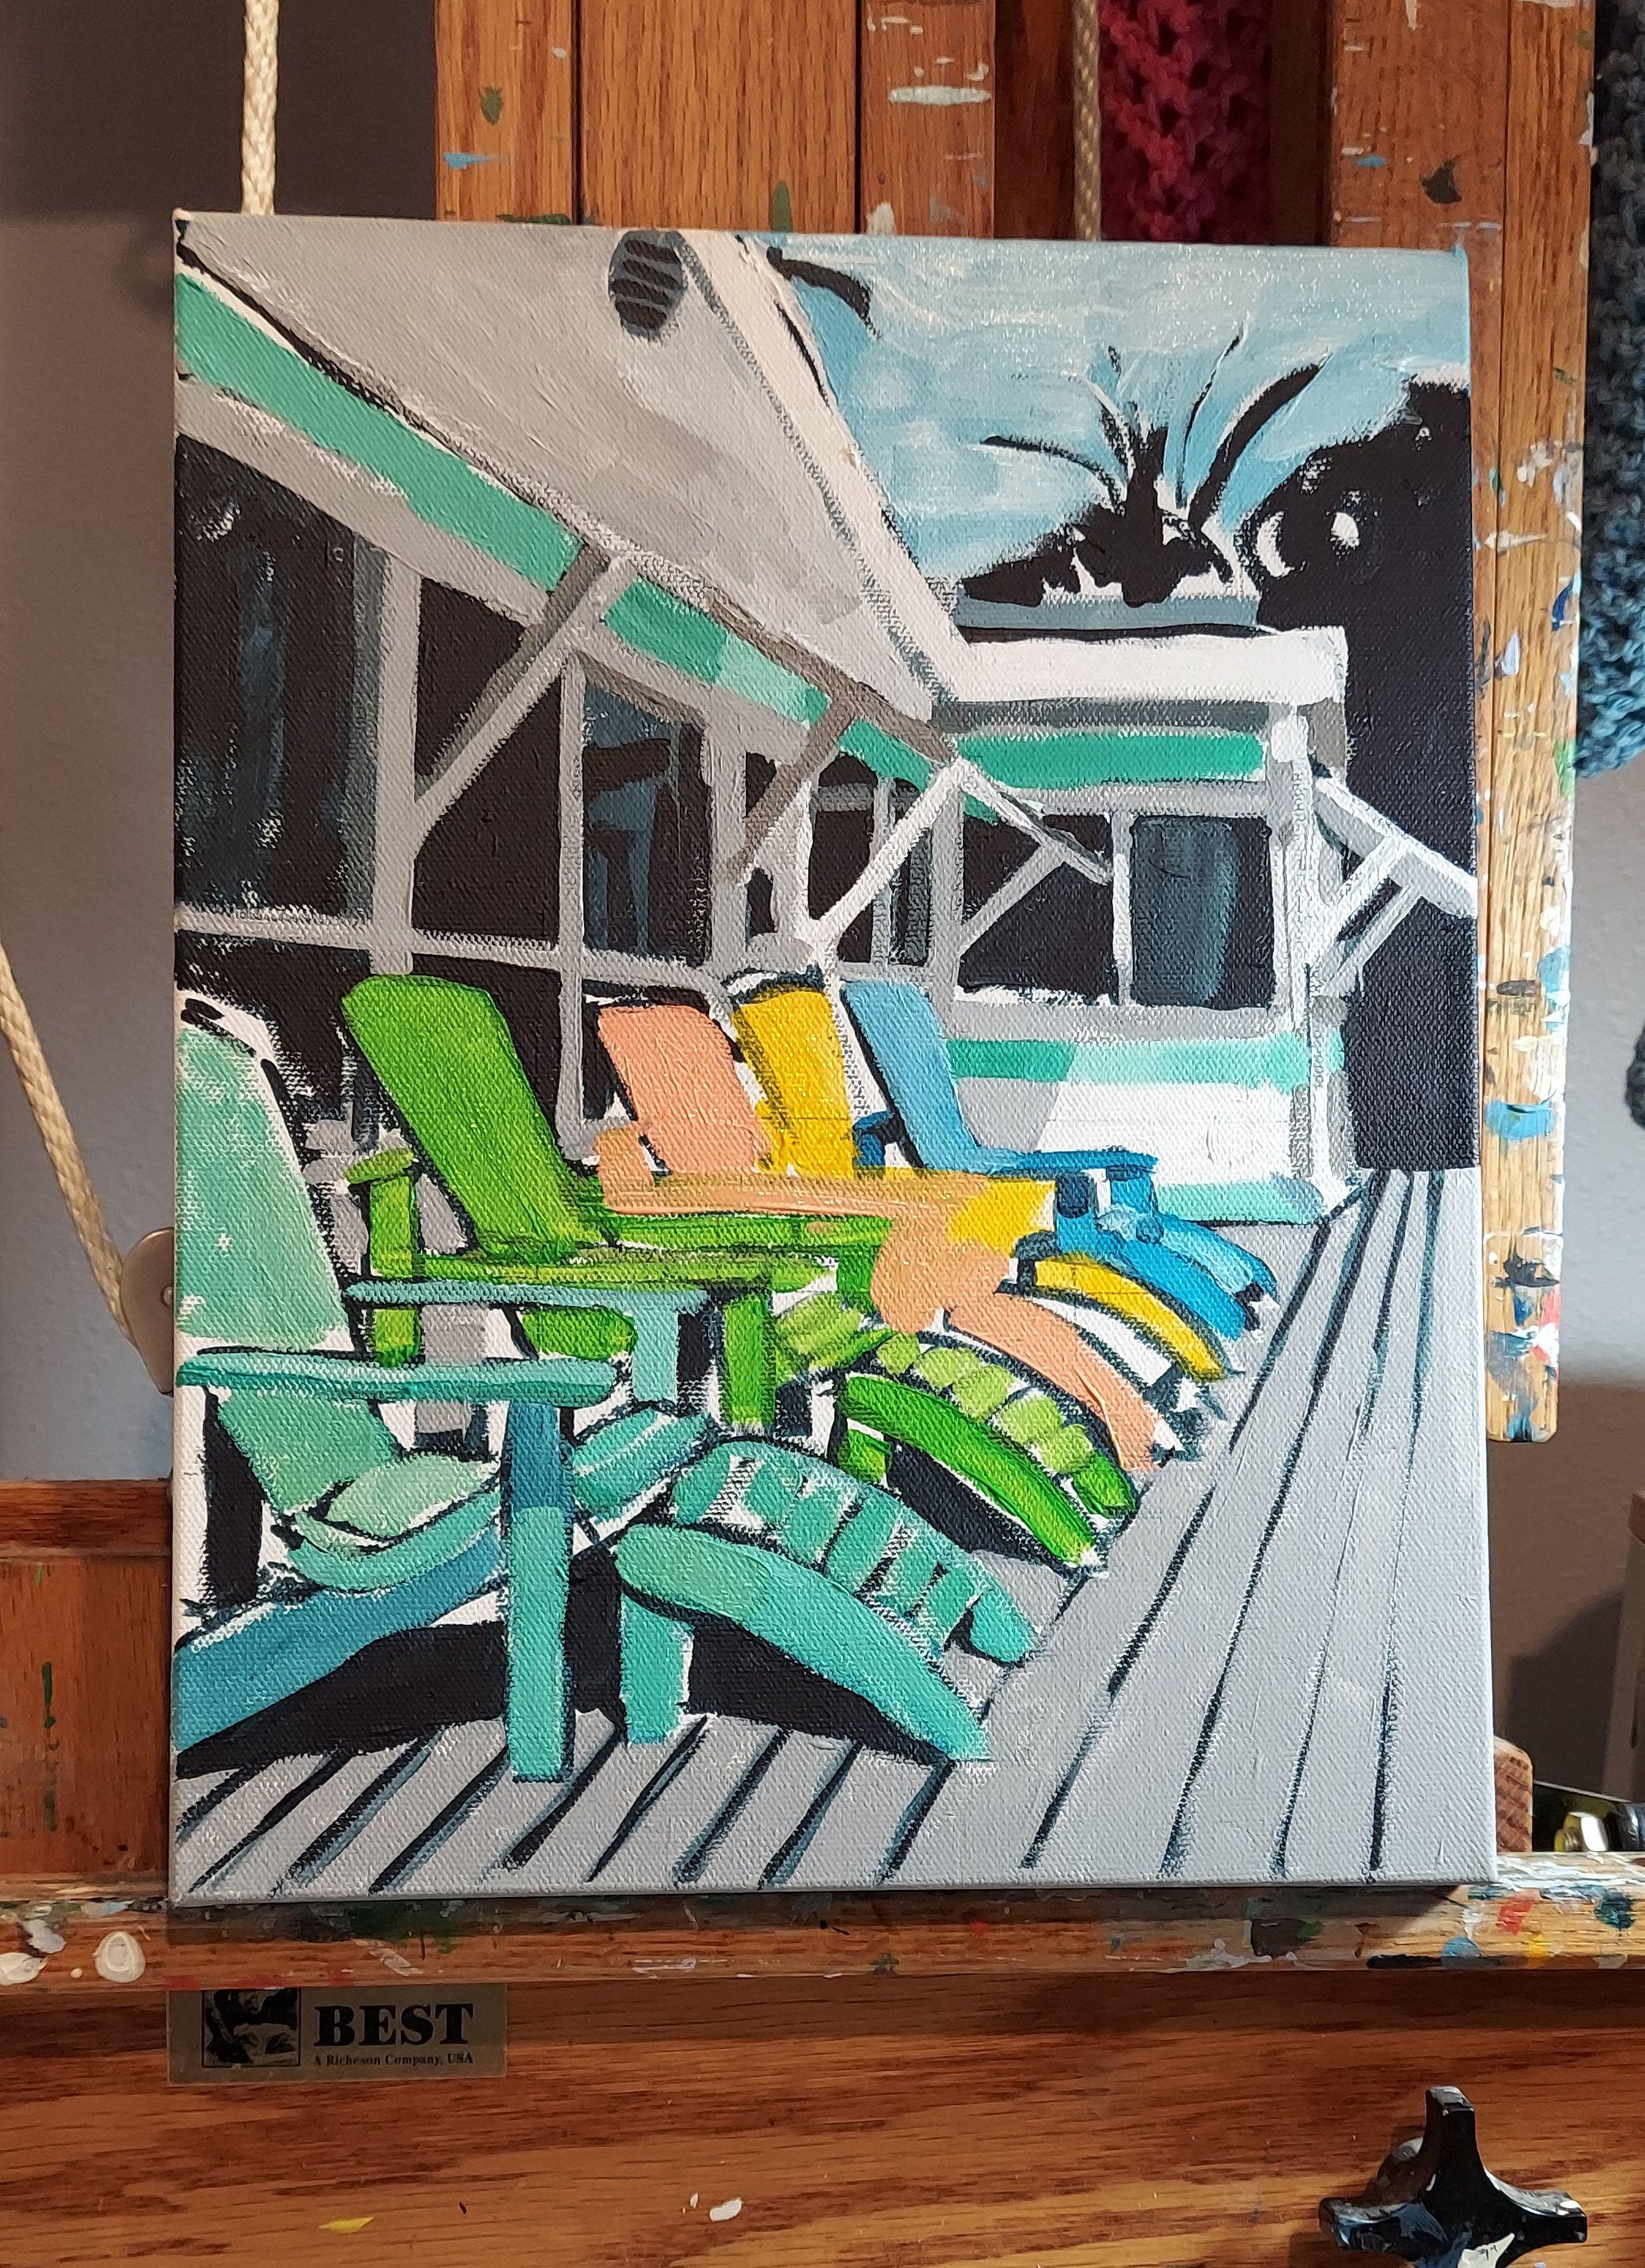 My big challenge at this time is painting a row of chairs. Or a row of anything. I get lost in the tiny pieces. Making each chair a different color helps me sort them out. Sometimes it's not people waiting - it's the chairs waiting. :: Painting ::